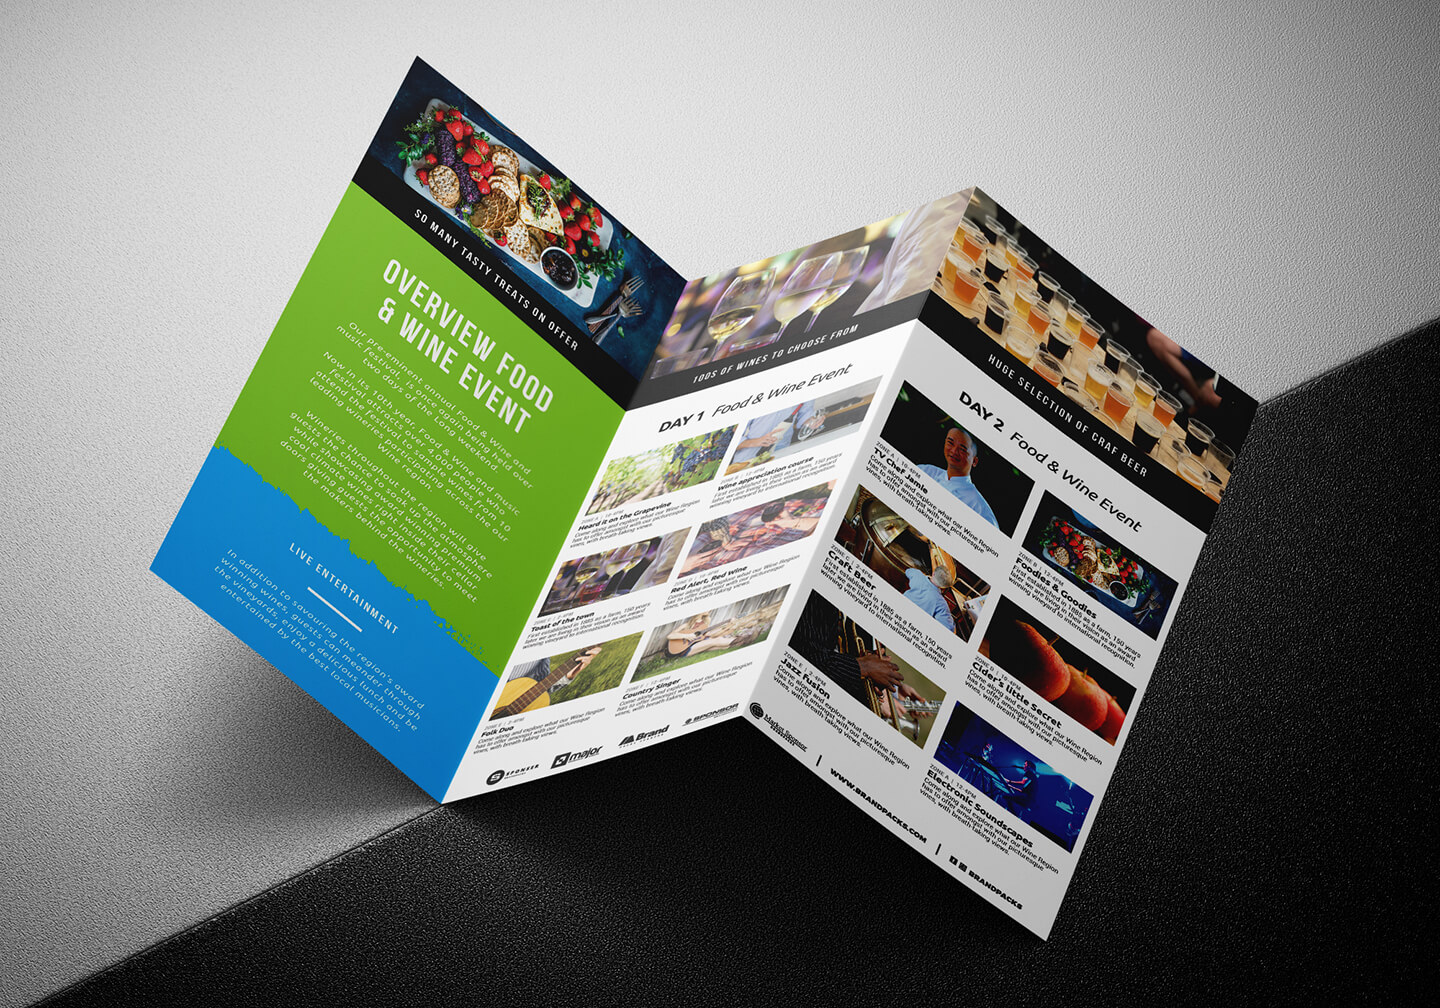 Free Tri Fold Brochure Template For Events & Festivals – Psd For Wine Brochure Template